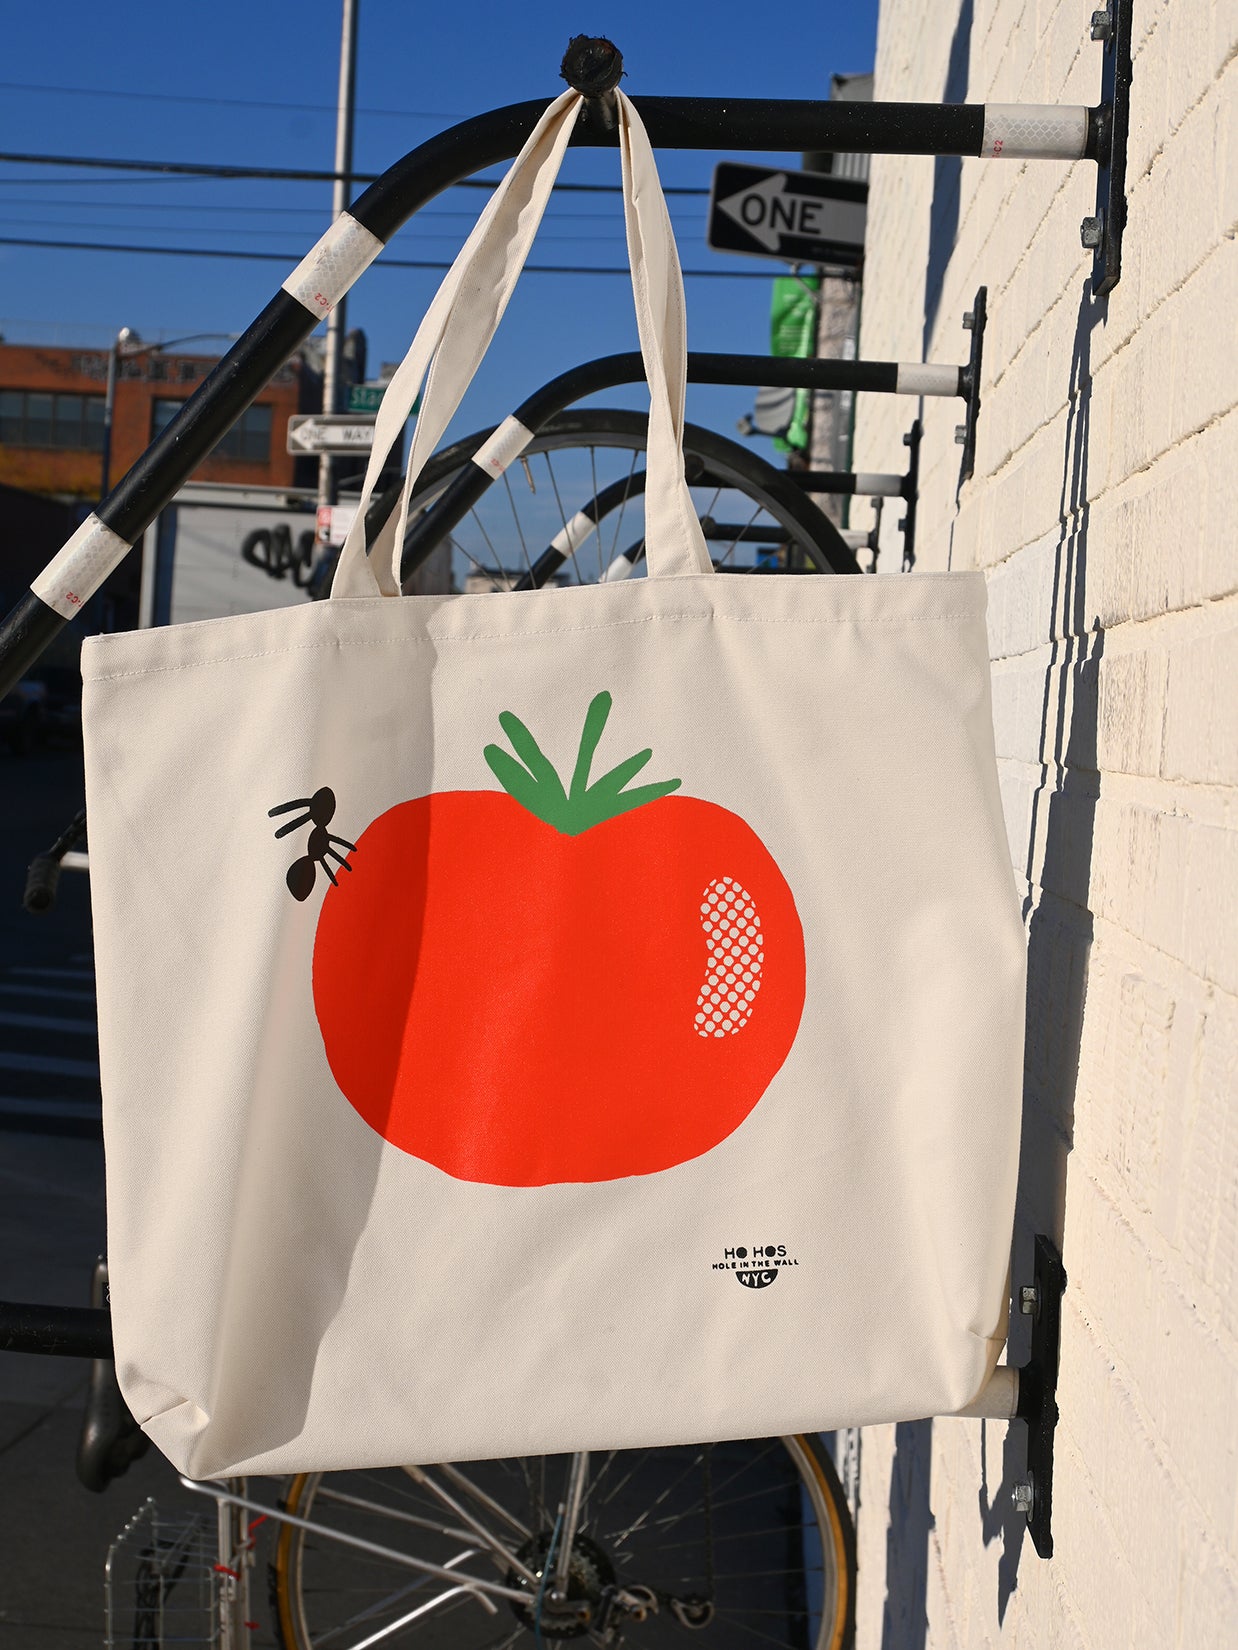 "Tomato" tote bag - Design by HO HOS HOLE IN THE WALL